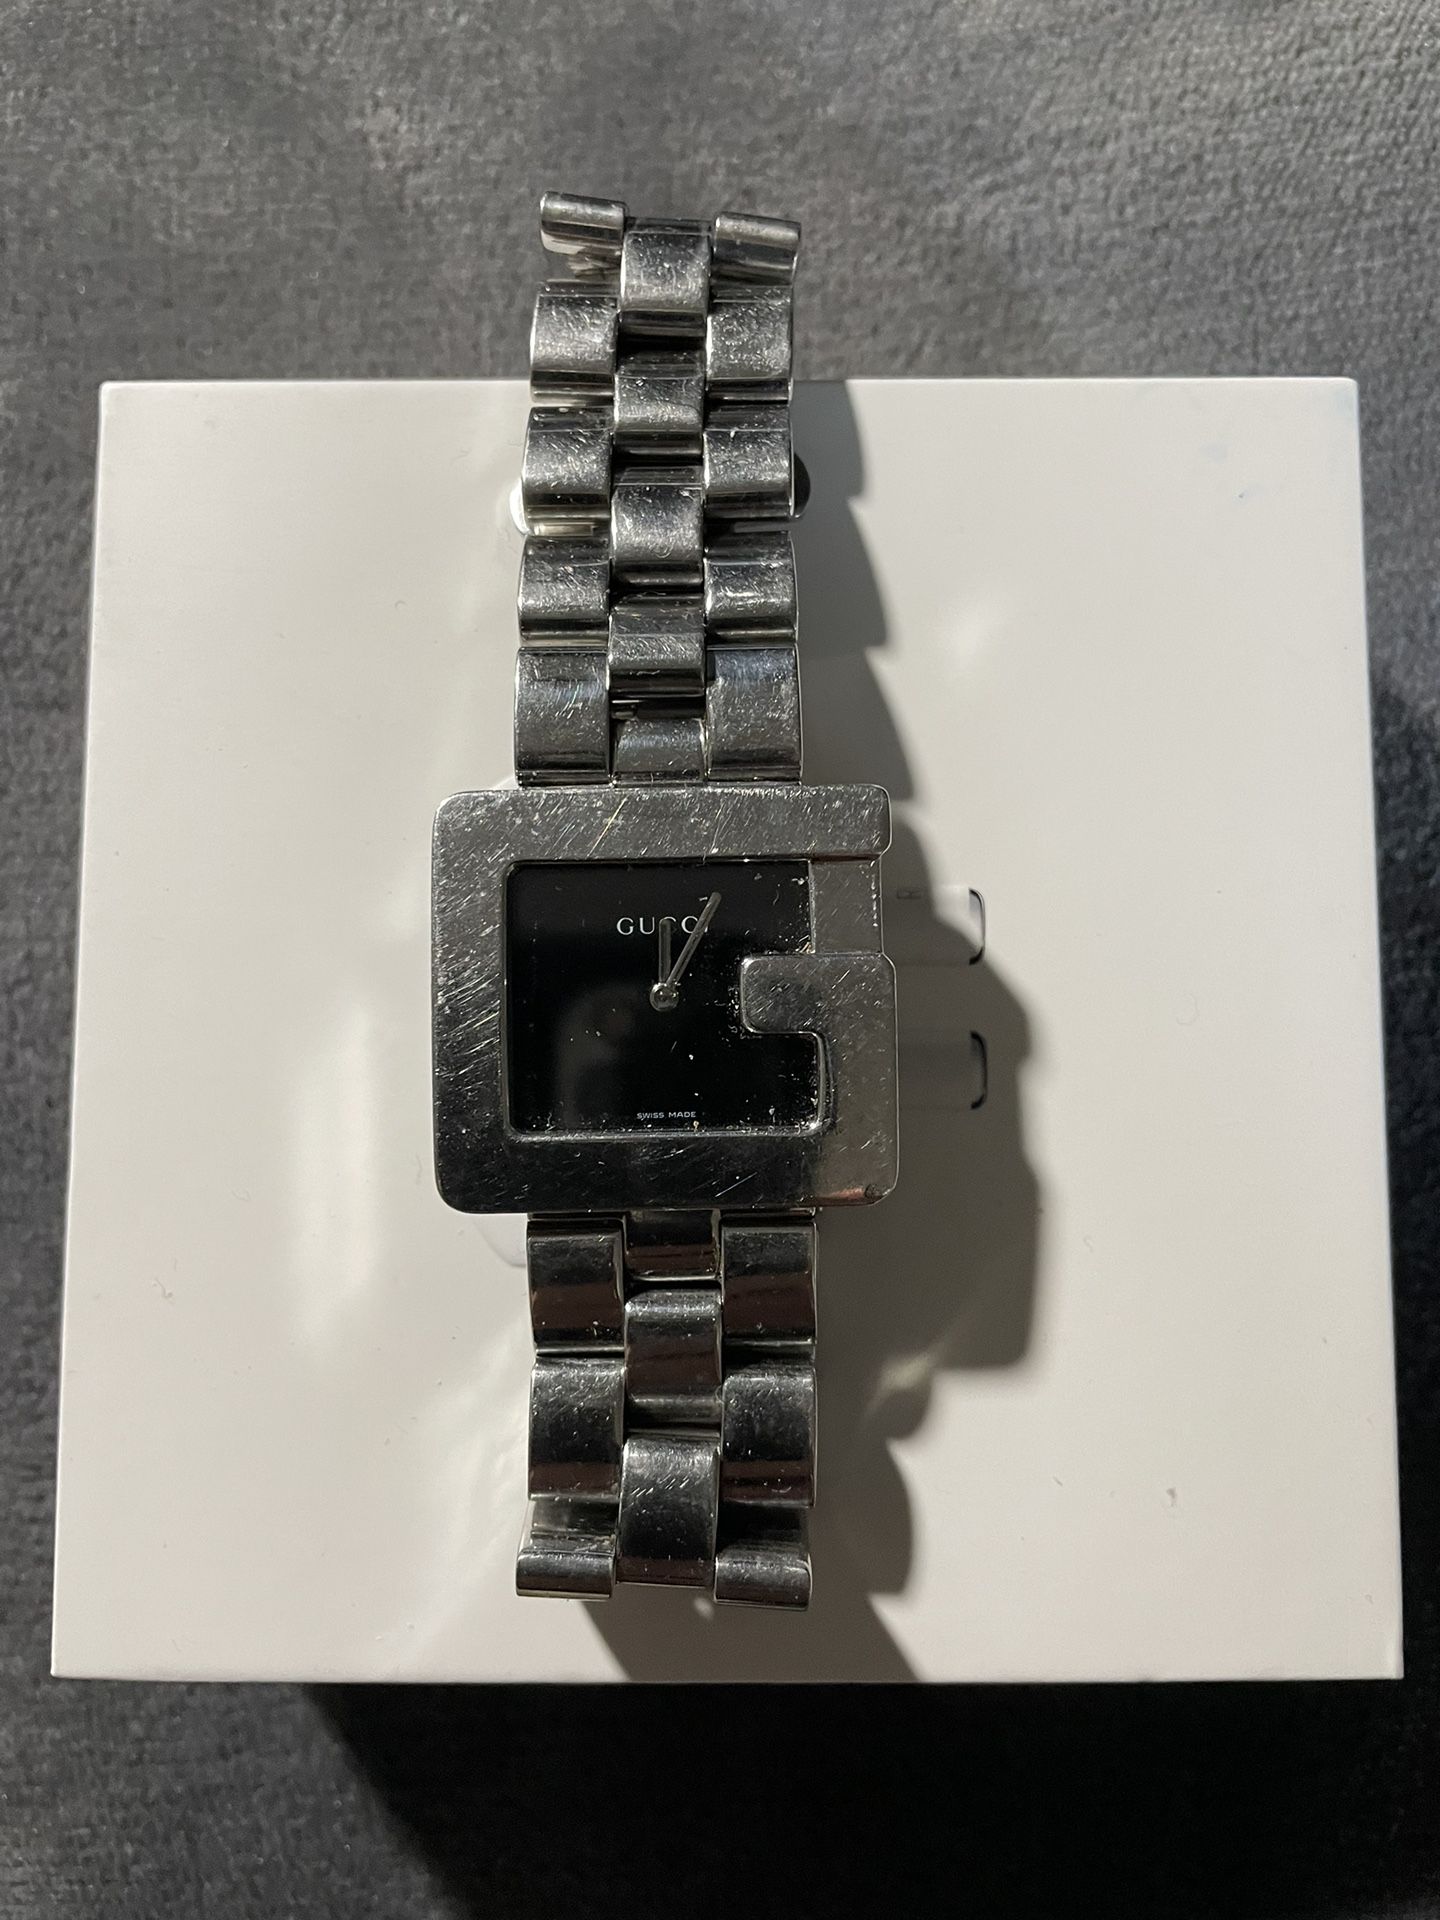 VINTAGE GUCCI WATCH  PRICE REDUCED 